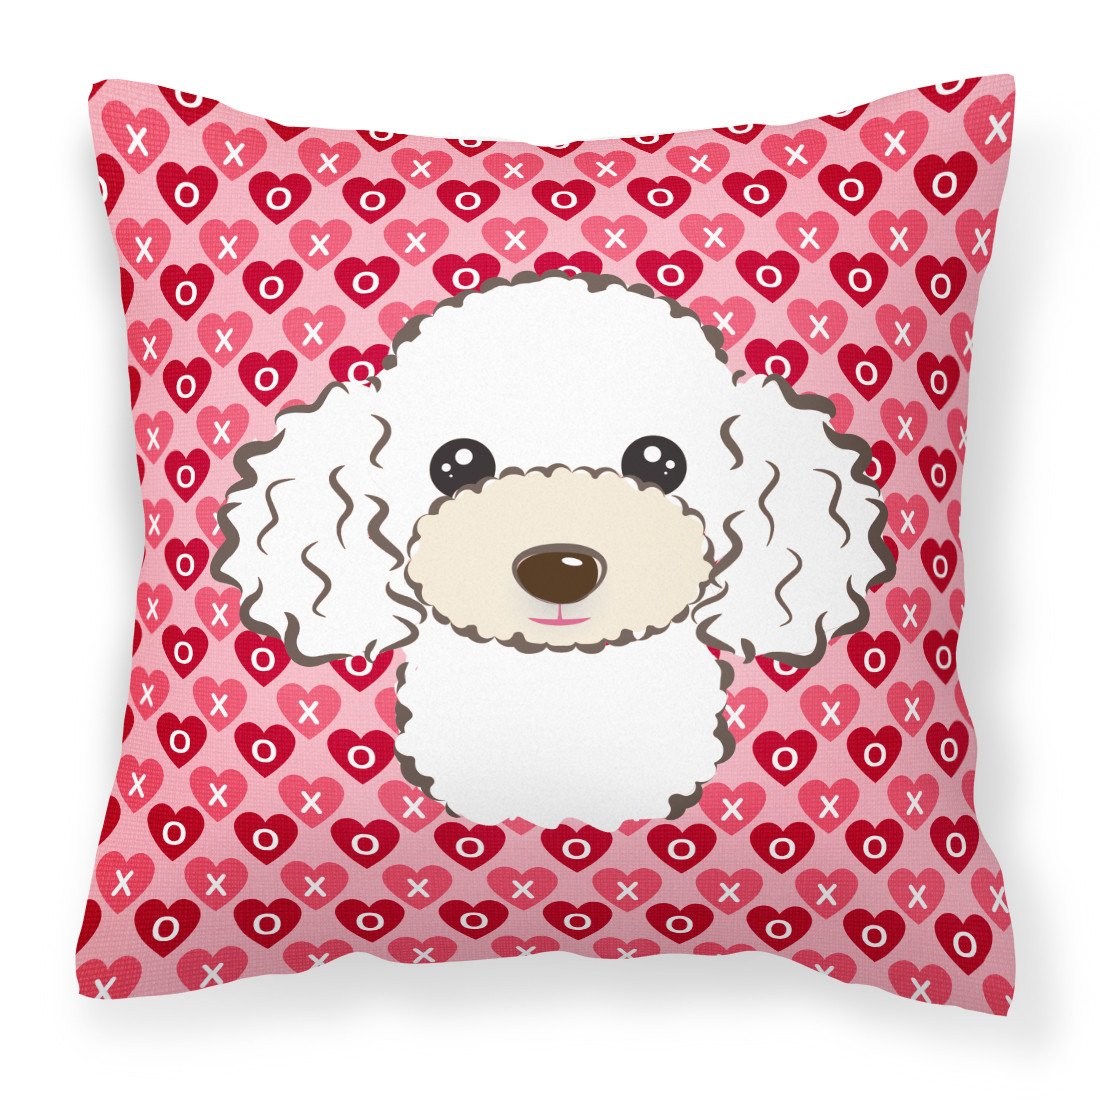 White Poodle Hearts Fabric Decorative Pillow BB5327PW1818 by Caroline's Treasures